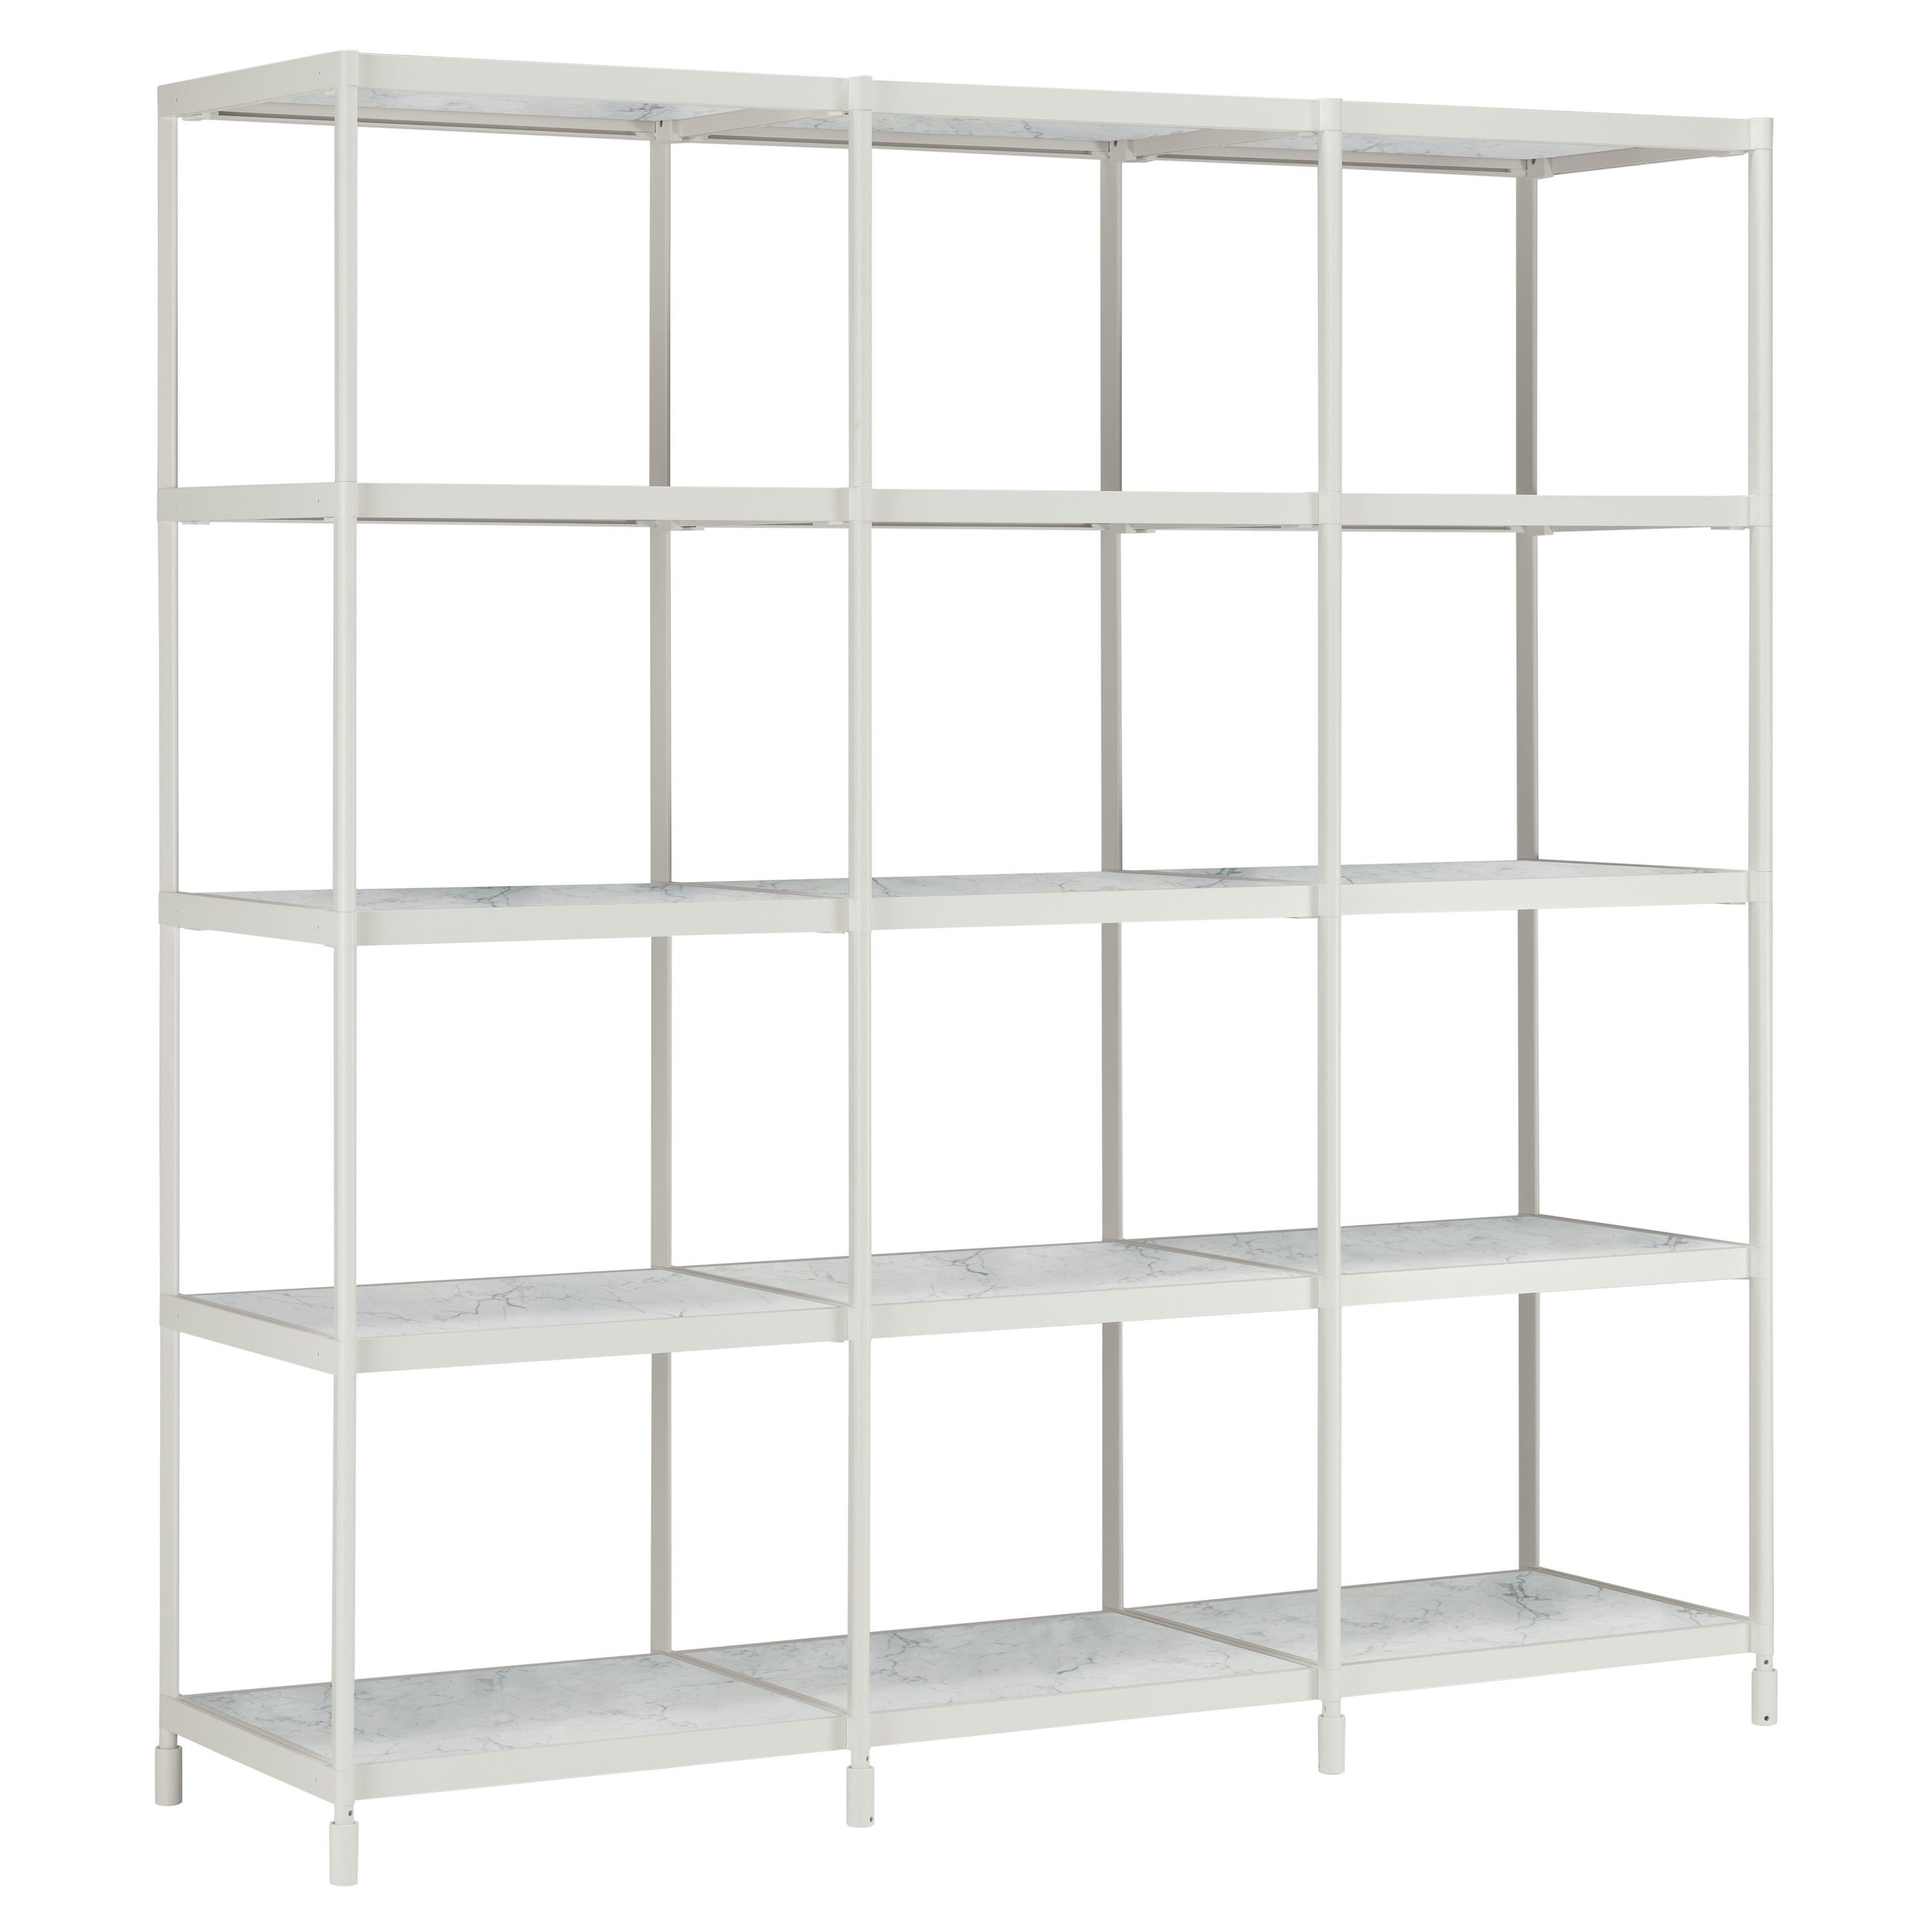 Alias SEC LIB005 Bookshelf in Marble with White Lacquered Metal Shelves For Sale